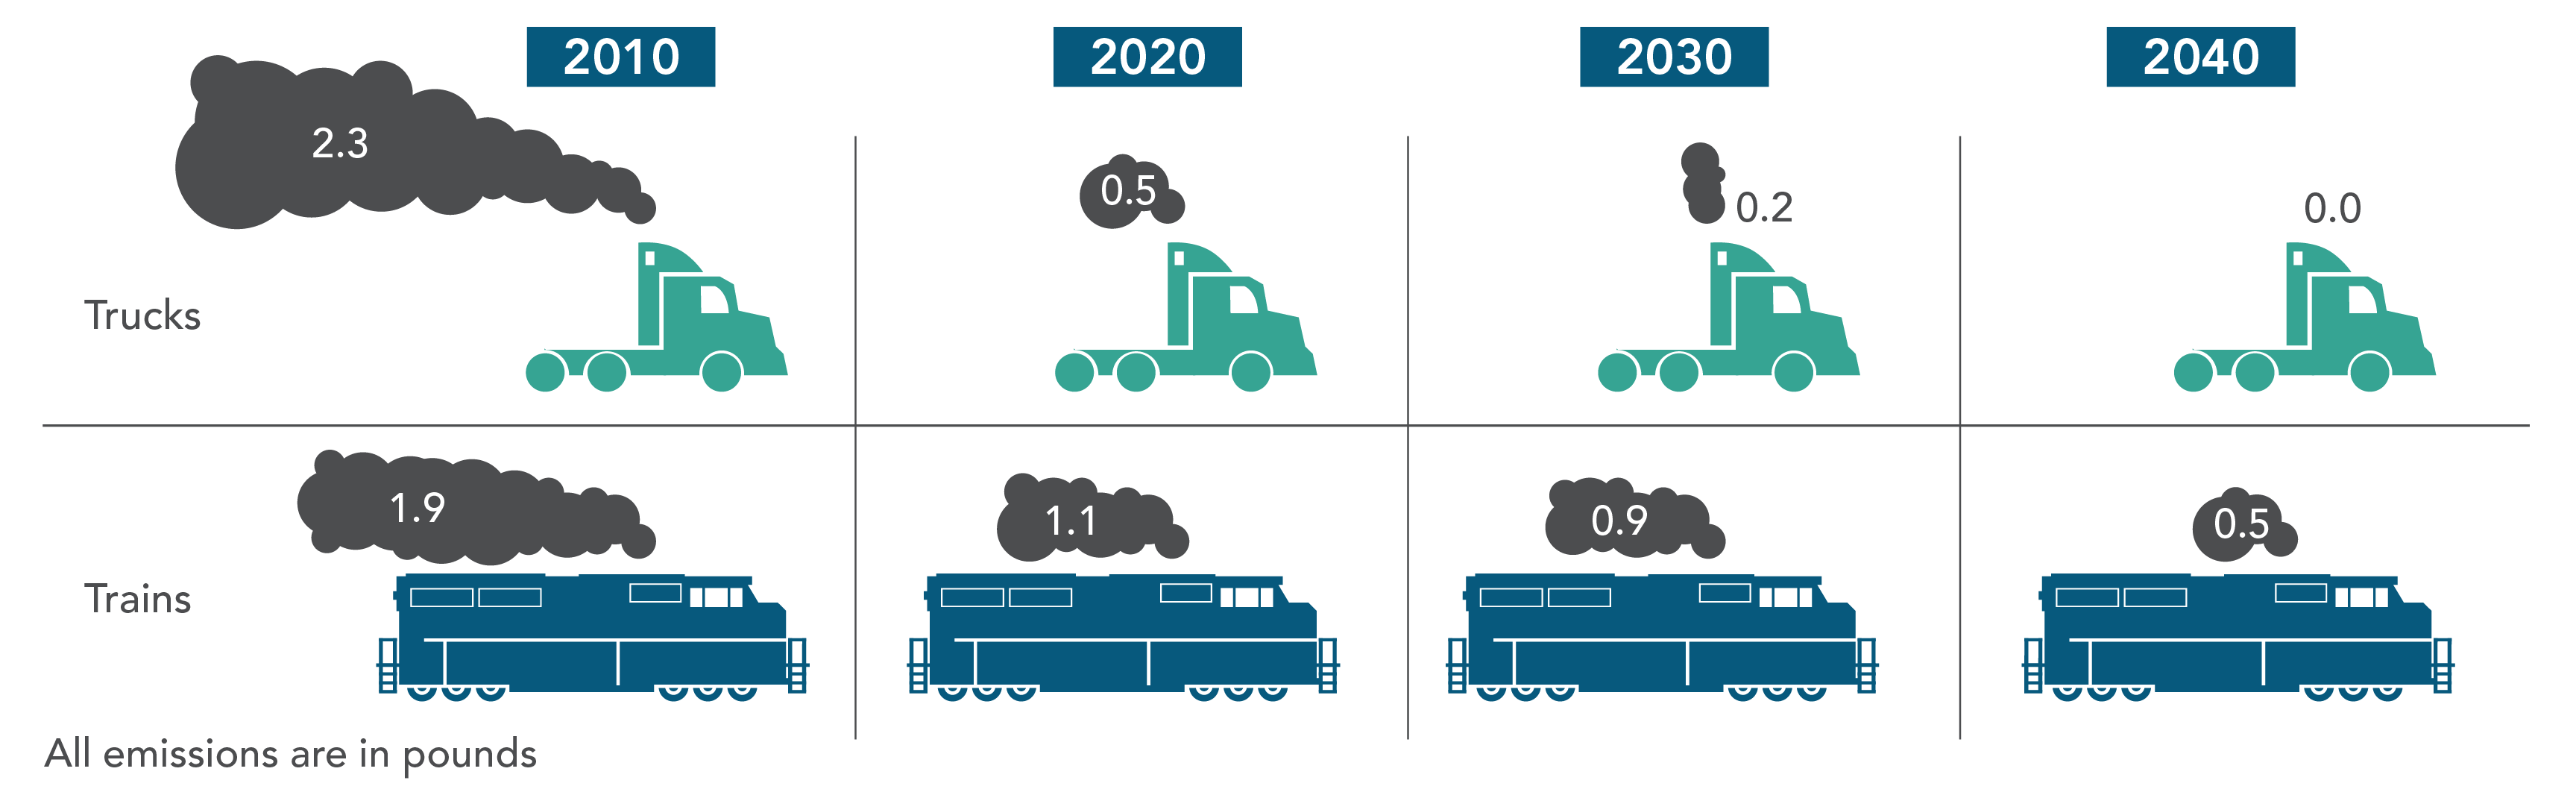 diagram comparing emissions of trucks with emission for trains over similar trips with the same cargo.  Trucks emit more in 2010, less in 2020, 2030, and 2050.